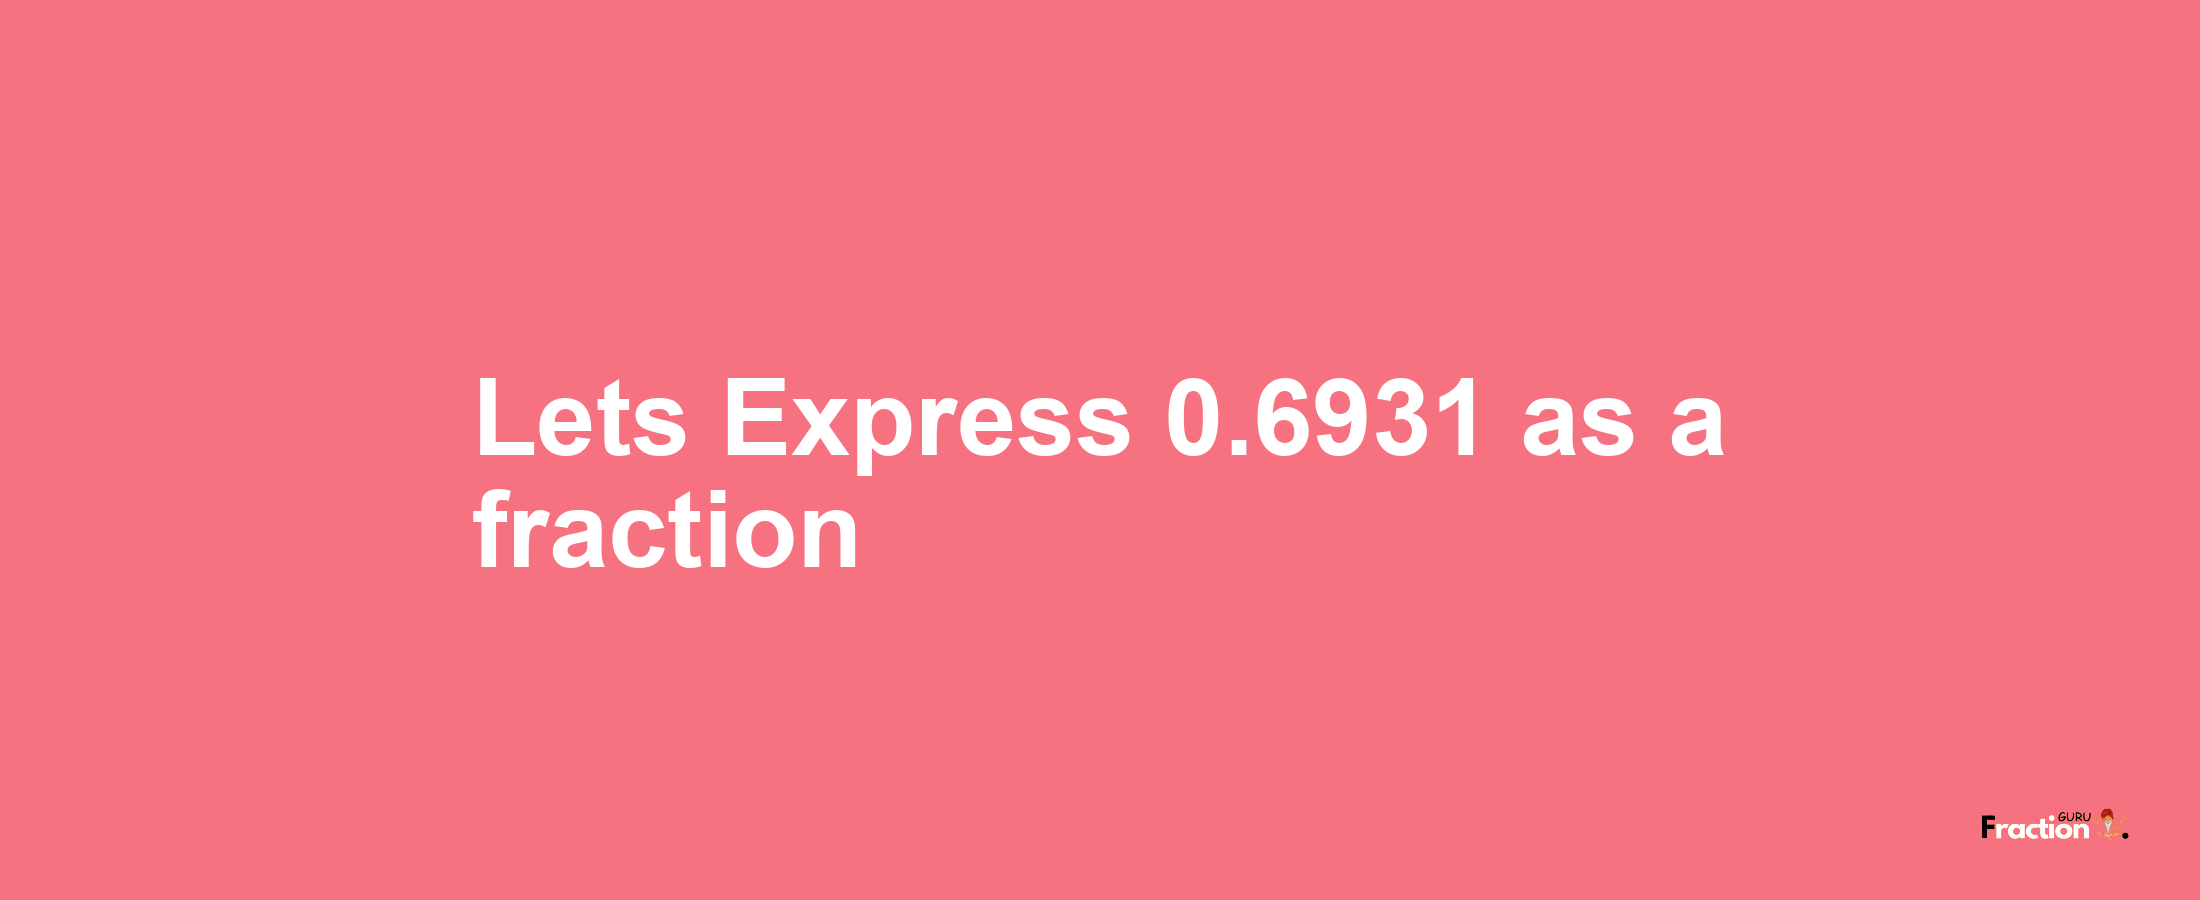 Lets Express 0.6931 as afraction